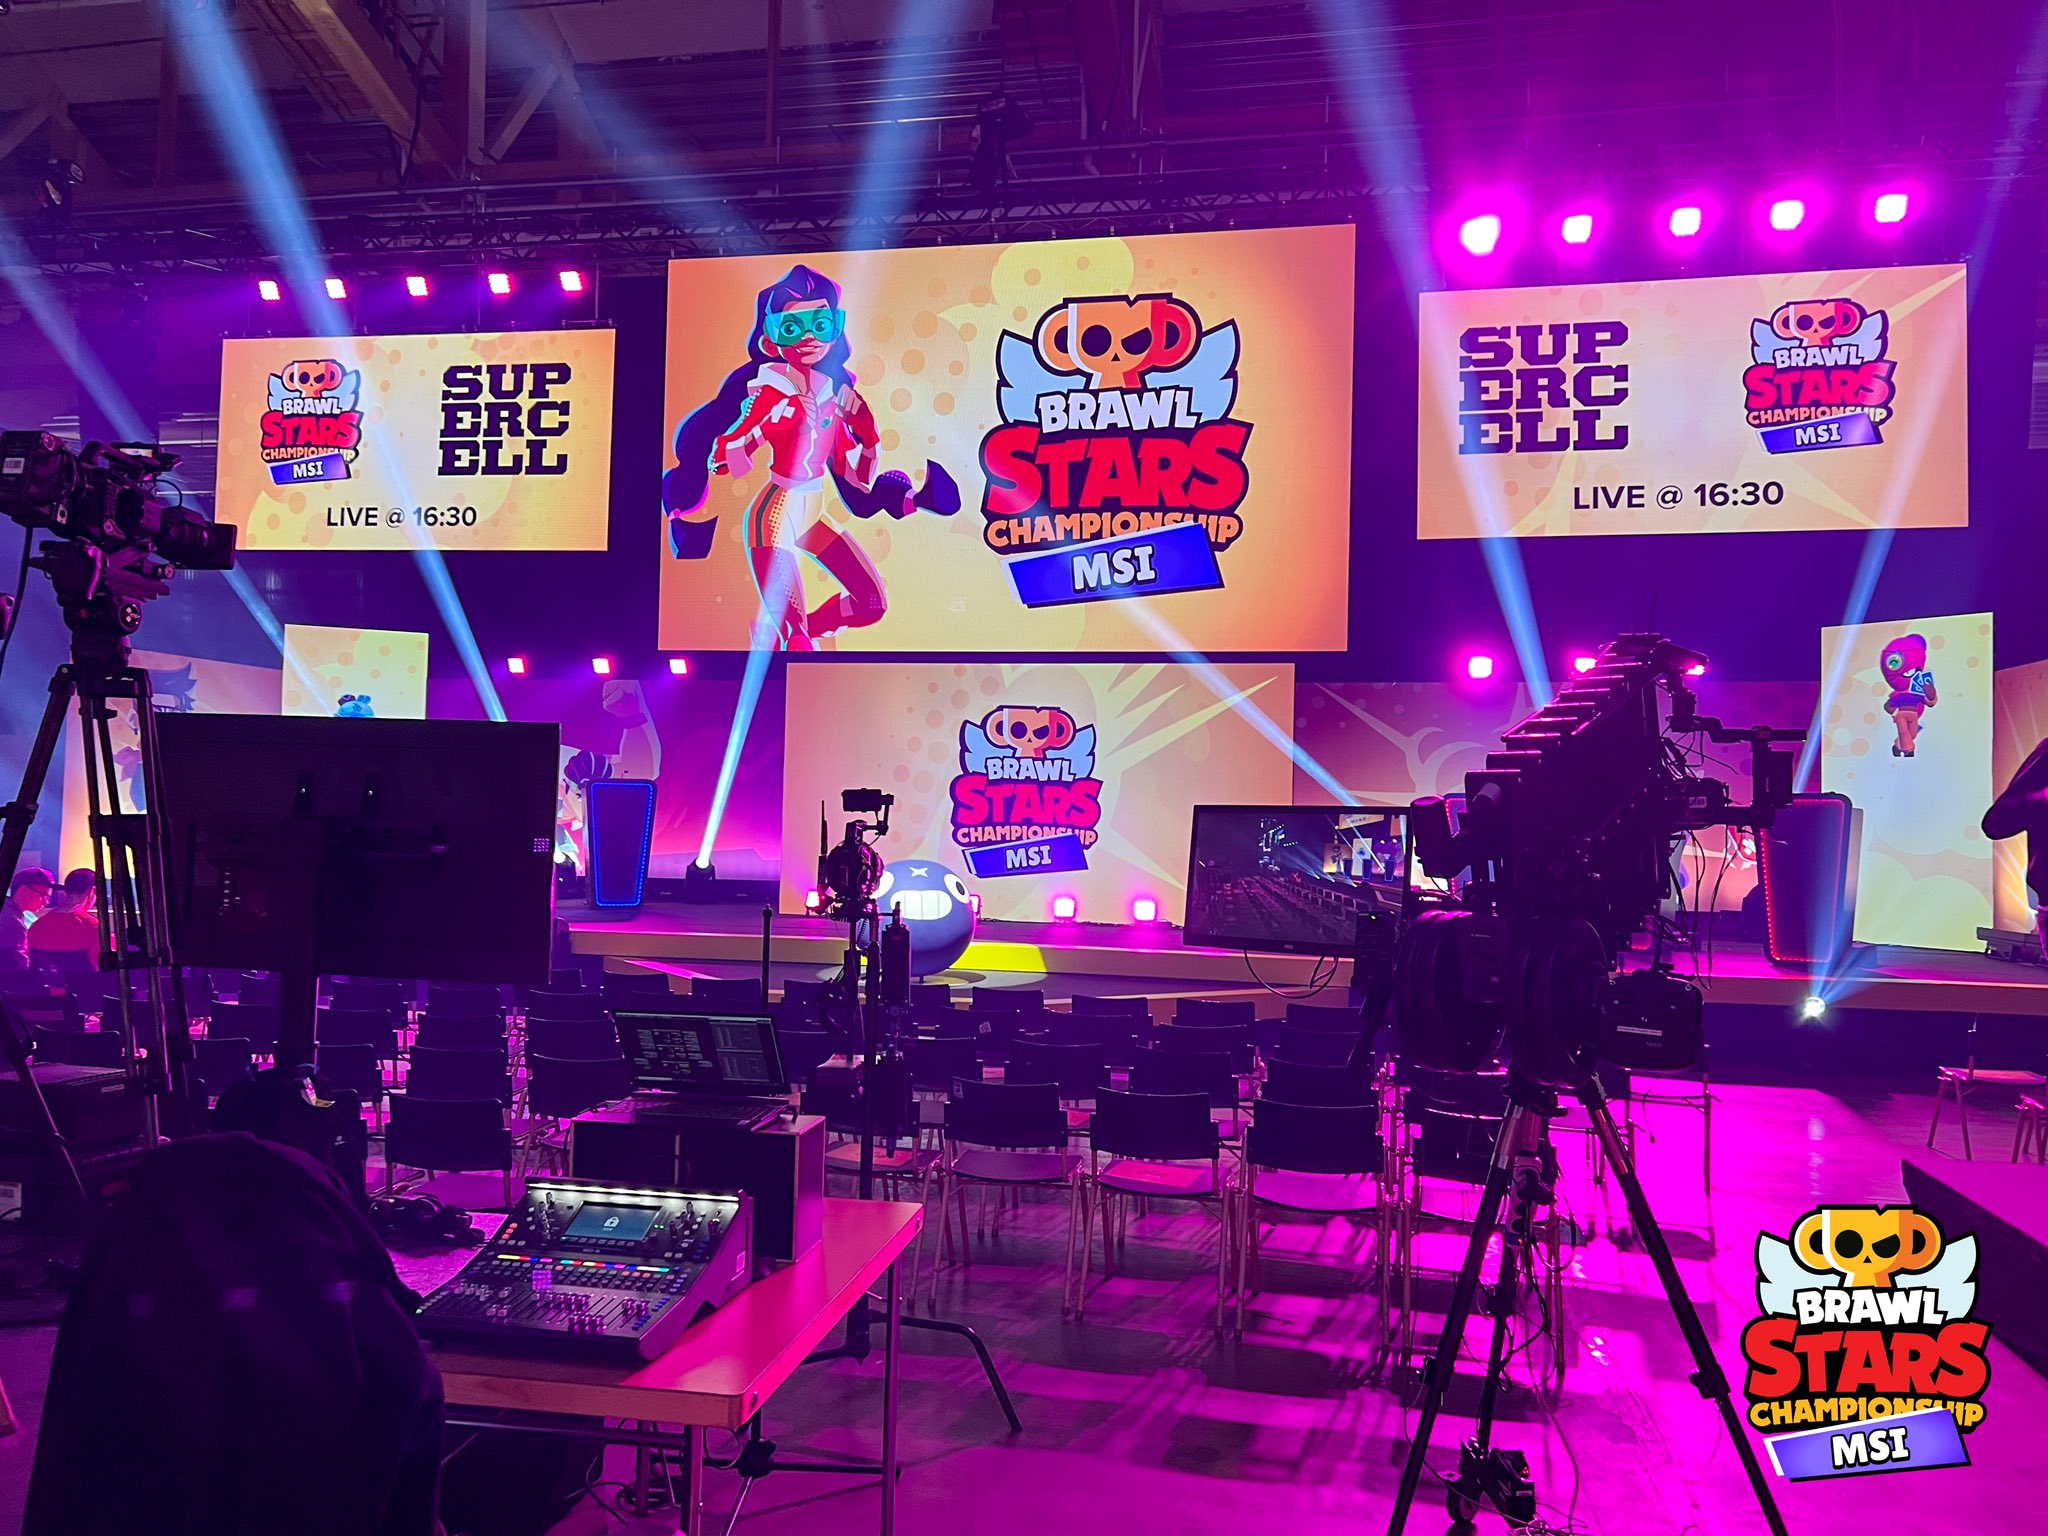 Brawl Stars Esports on X: Are you ready for some intense Brawl Stars  action? Then it's time to tune in to the EMEA region of the Brawl Stars  Championship, live now on